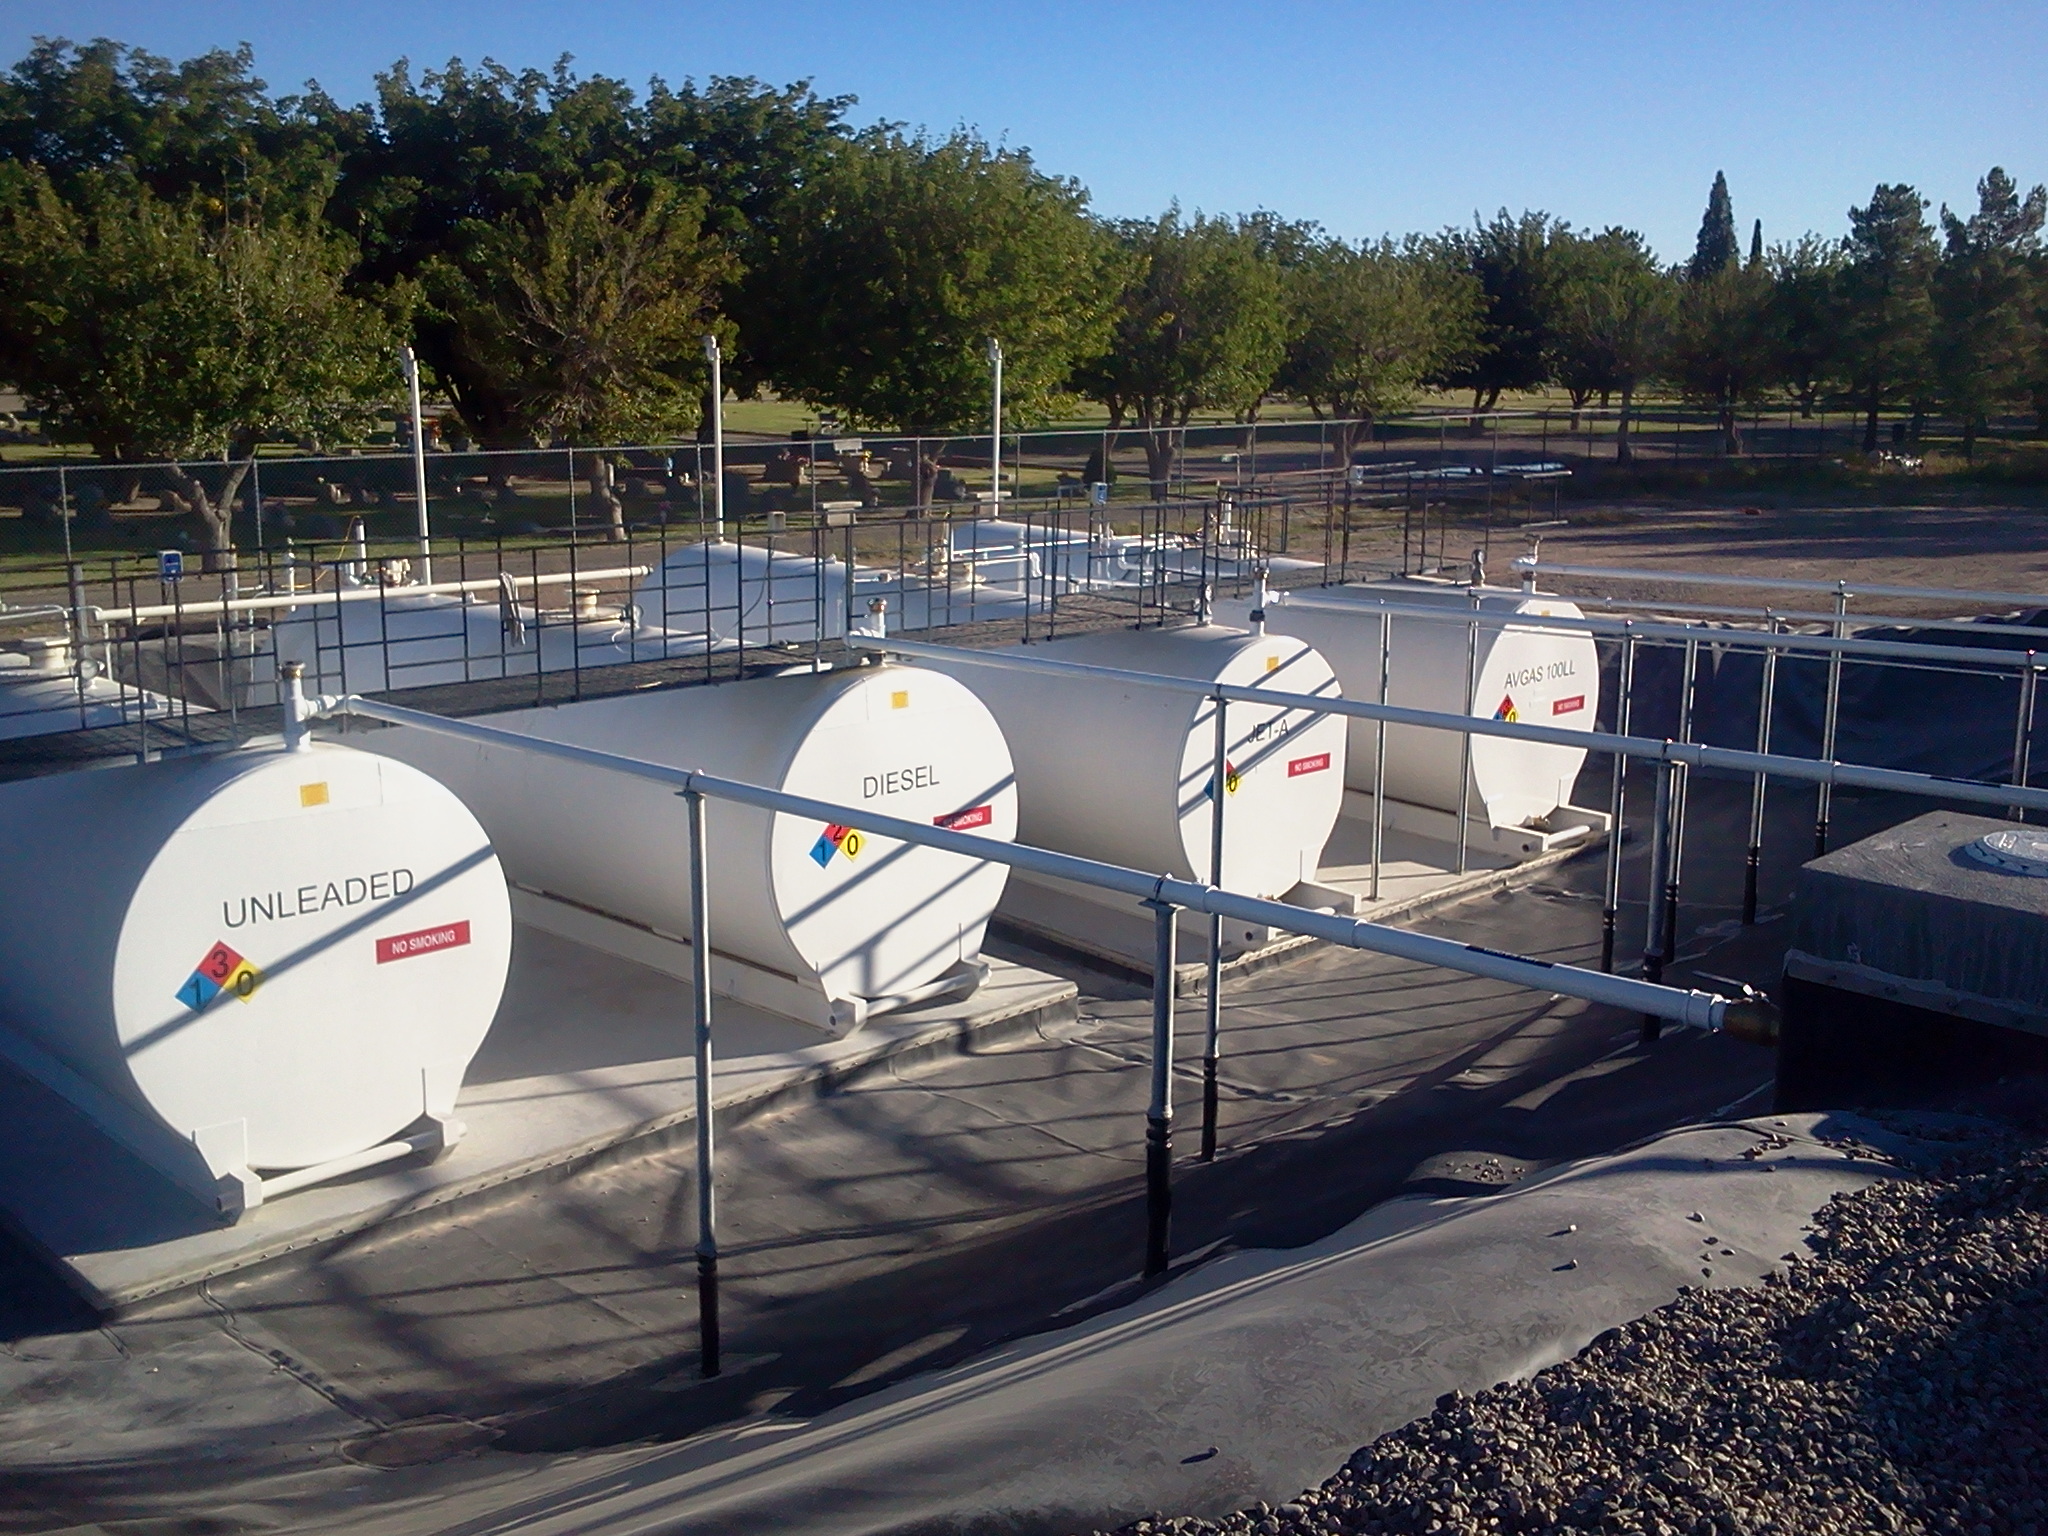 A fuel farm in Deming, New Mexico, with three labeled tanks for unleaded and diesel fuels, surrounded by a metal fence, in a sunny outdoor setting.